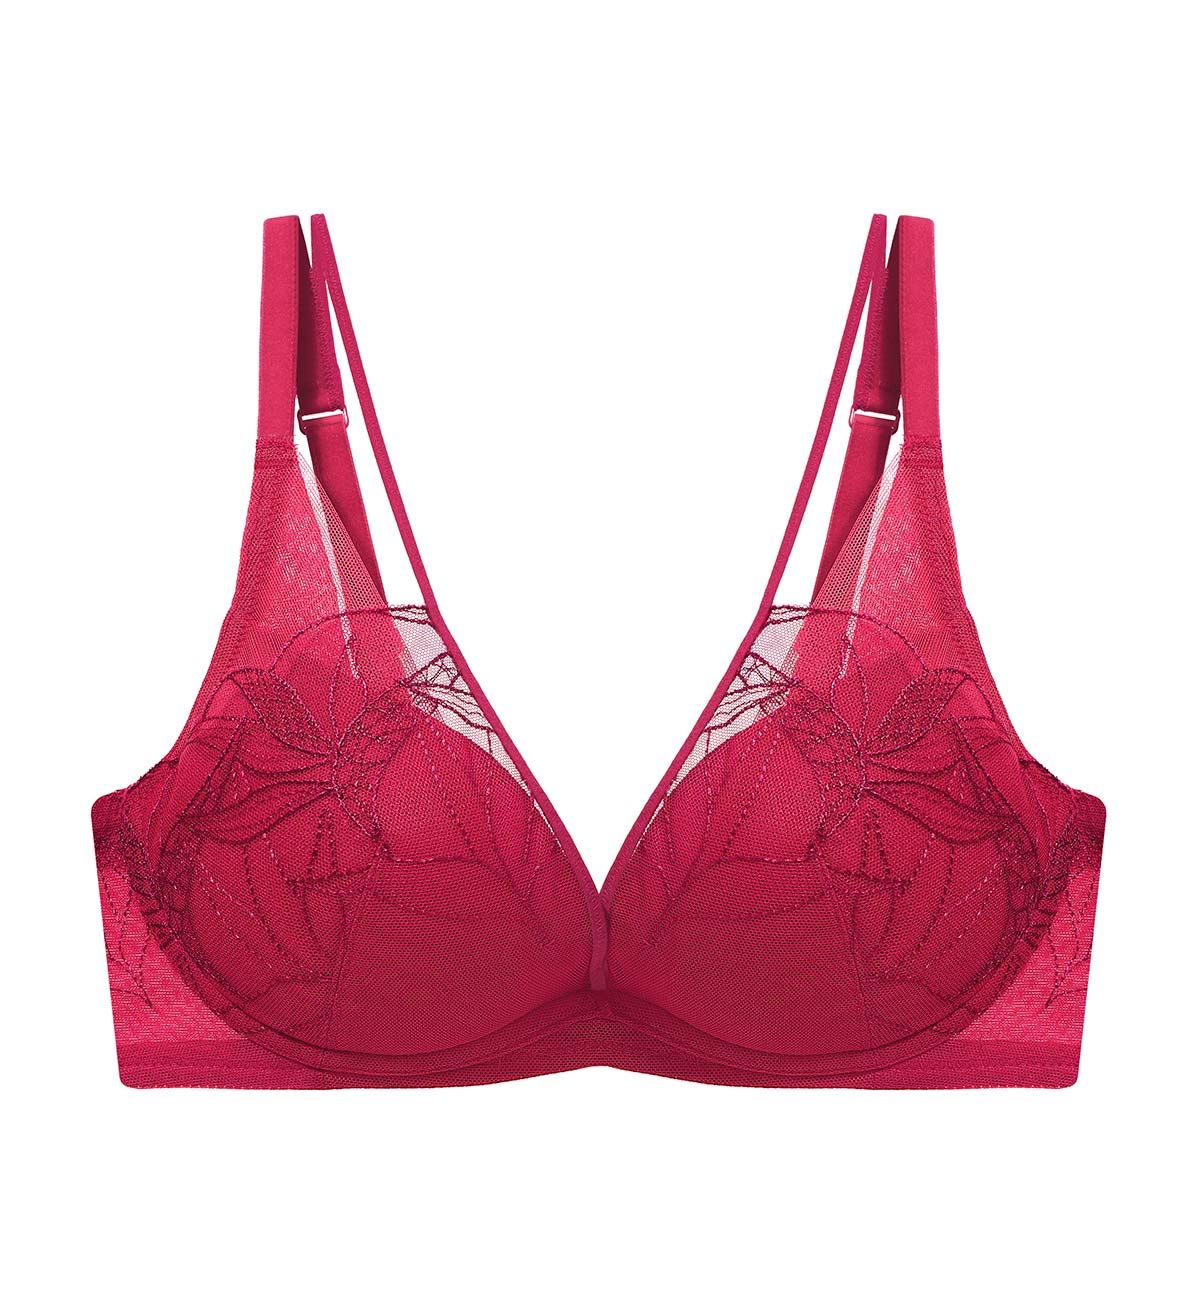 The return of the push-up bra: A trend that triumphs on the red